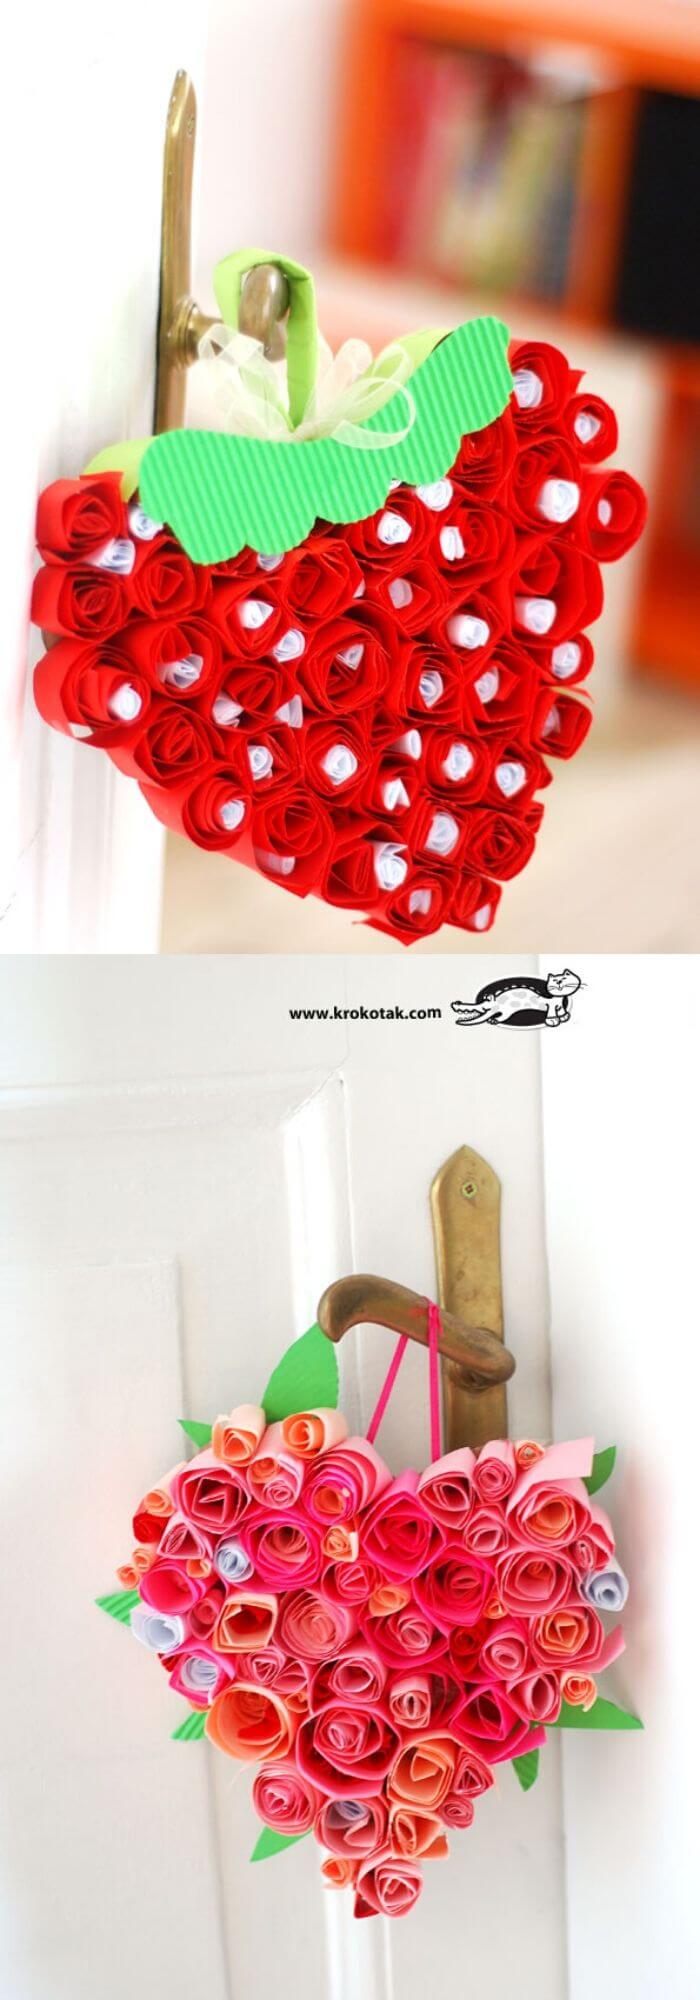 Strawberries | Heart-Shaped Crafts For Valentine's Day